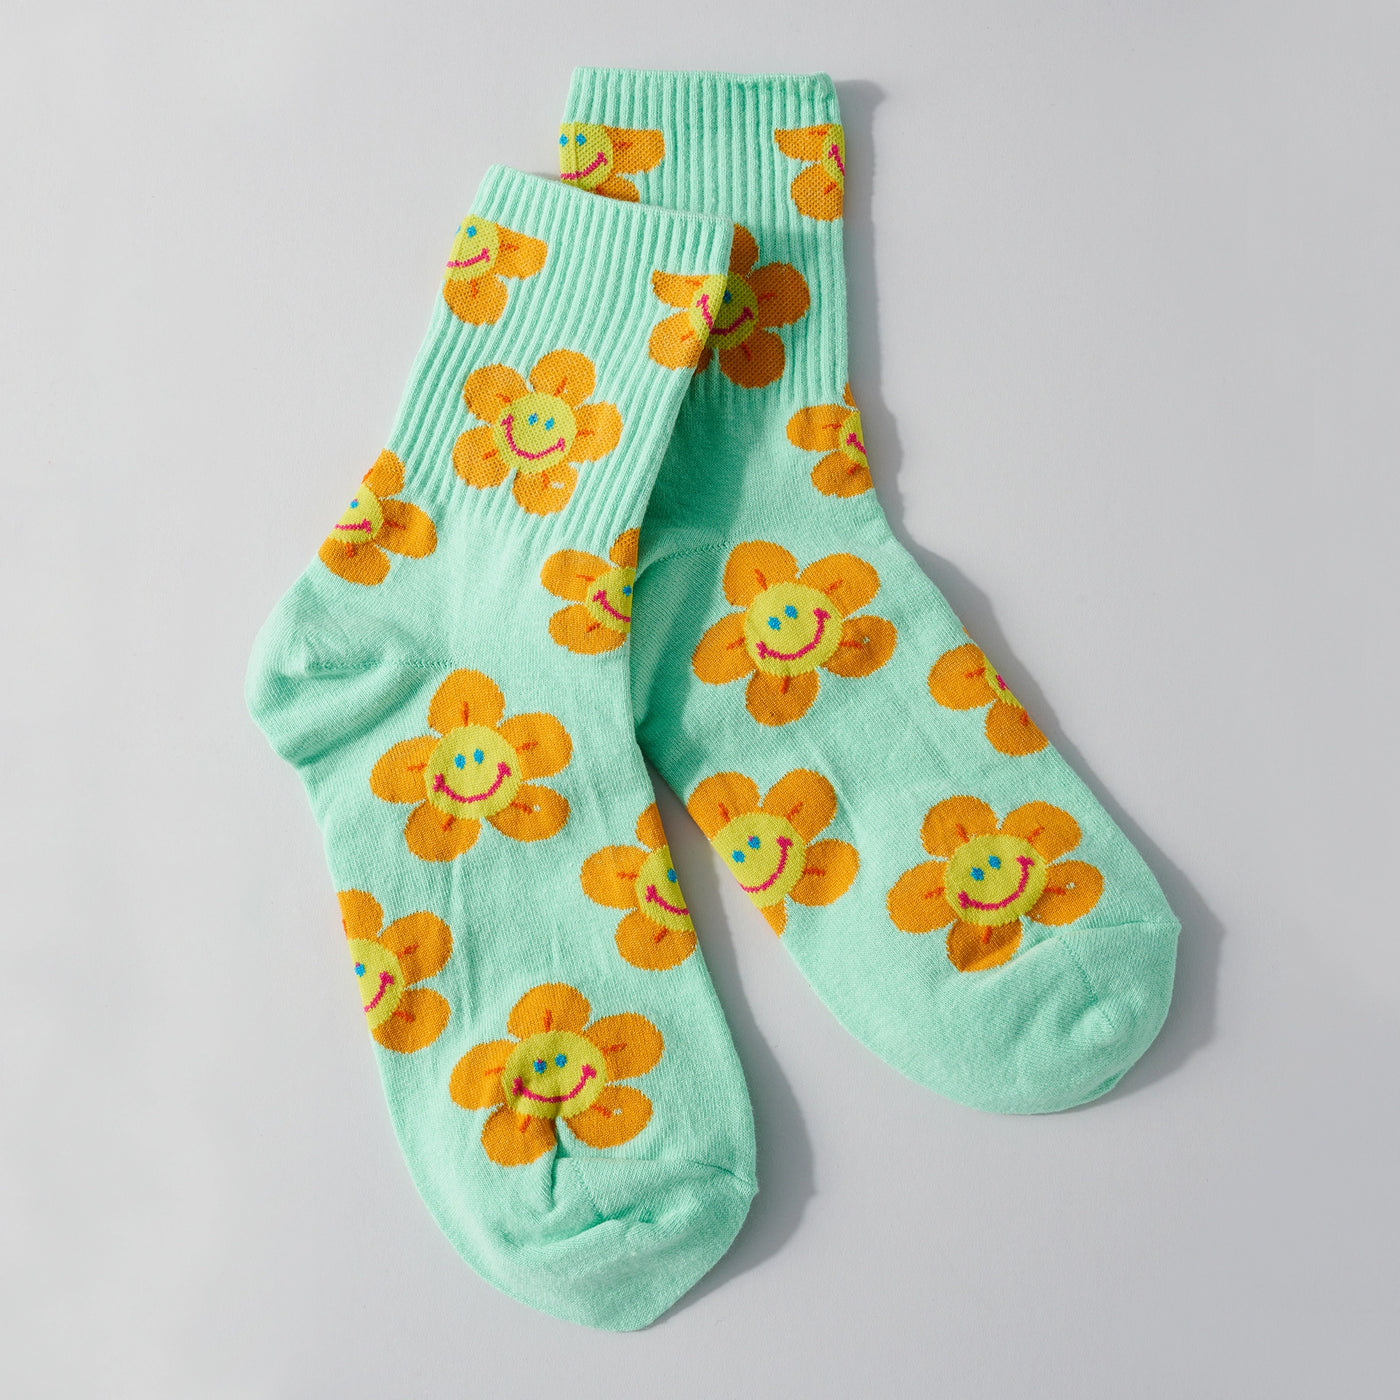 Mint sea foam green daisy smiley face socks flower gift for her. Modern smart causal female chic effortless outfit womens ladies gift elegant effortless clothing clothes apparel outfits chic summer style women’s boutique trendy fall back to school teacher office cute outfit 